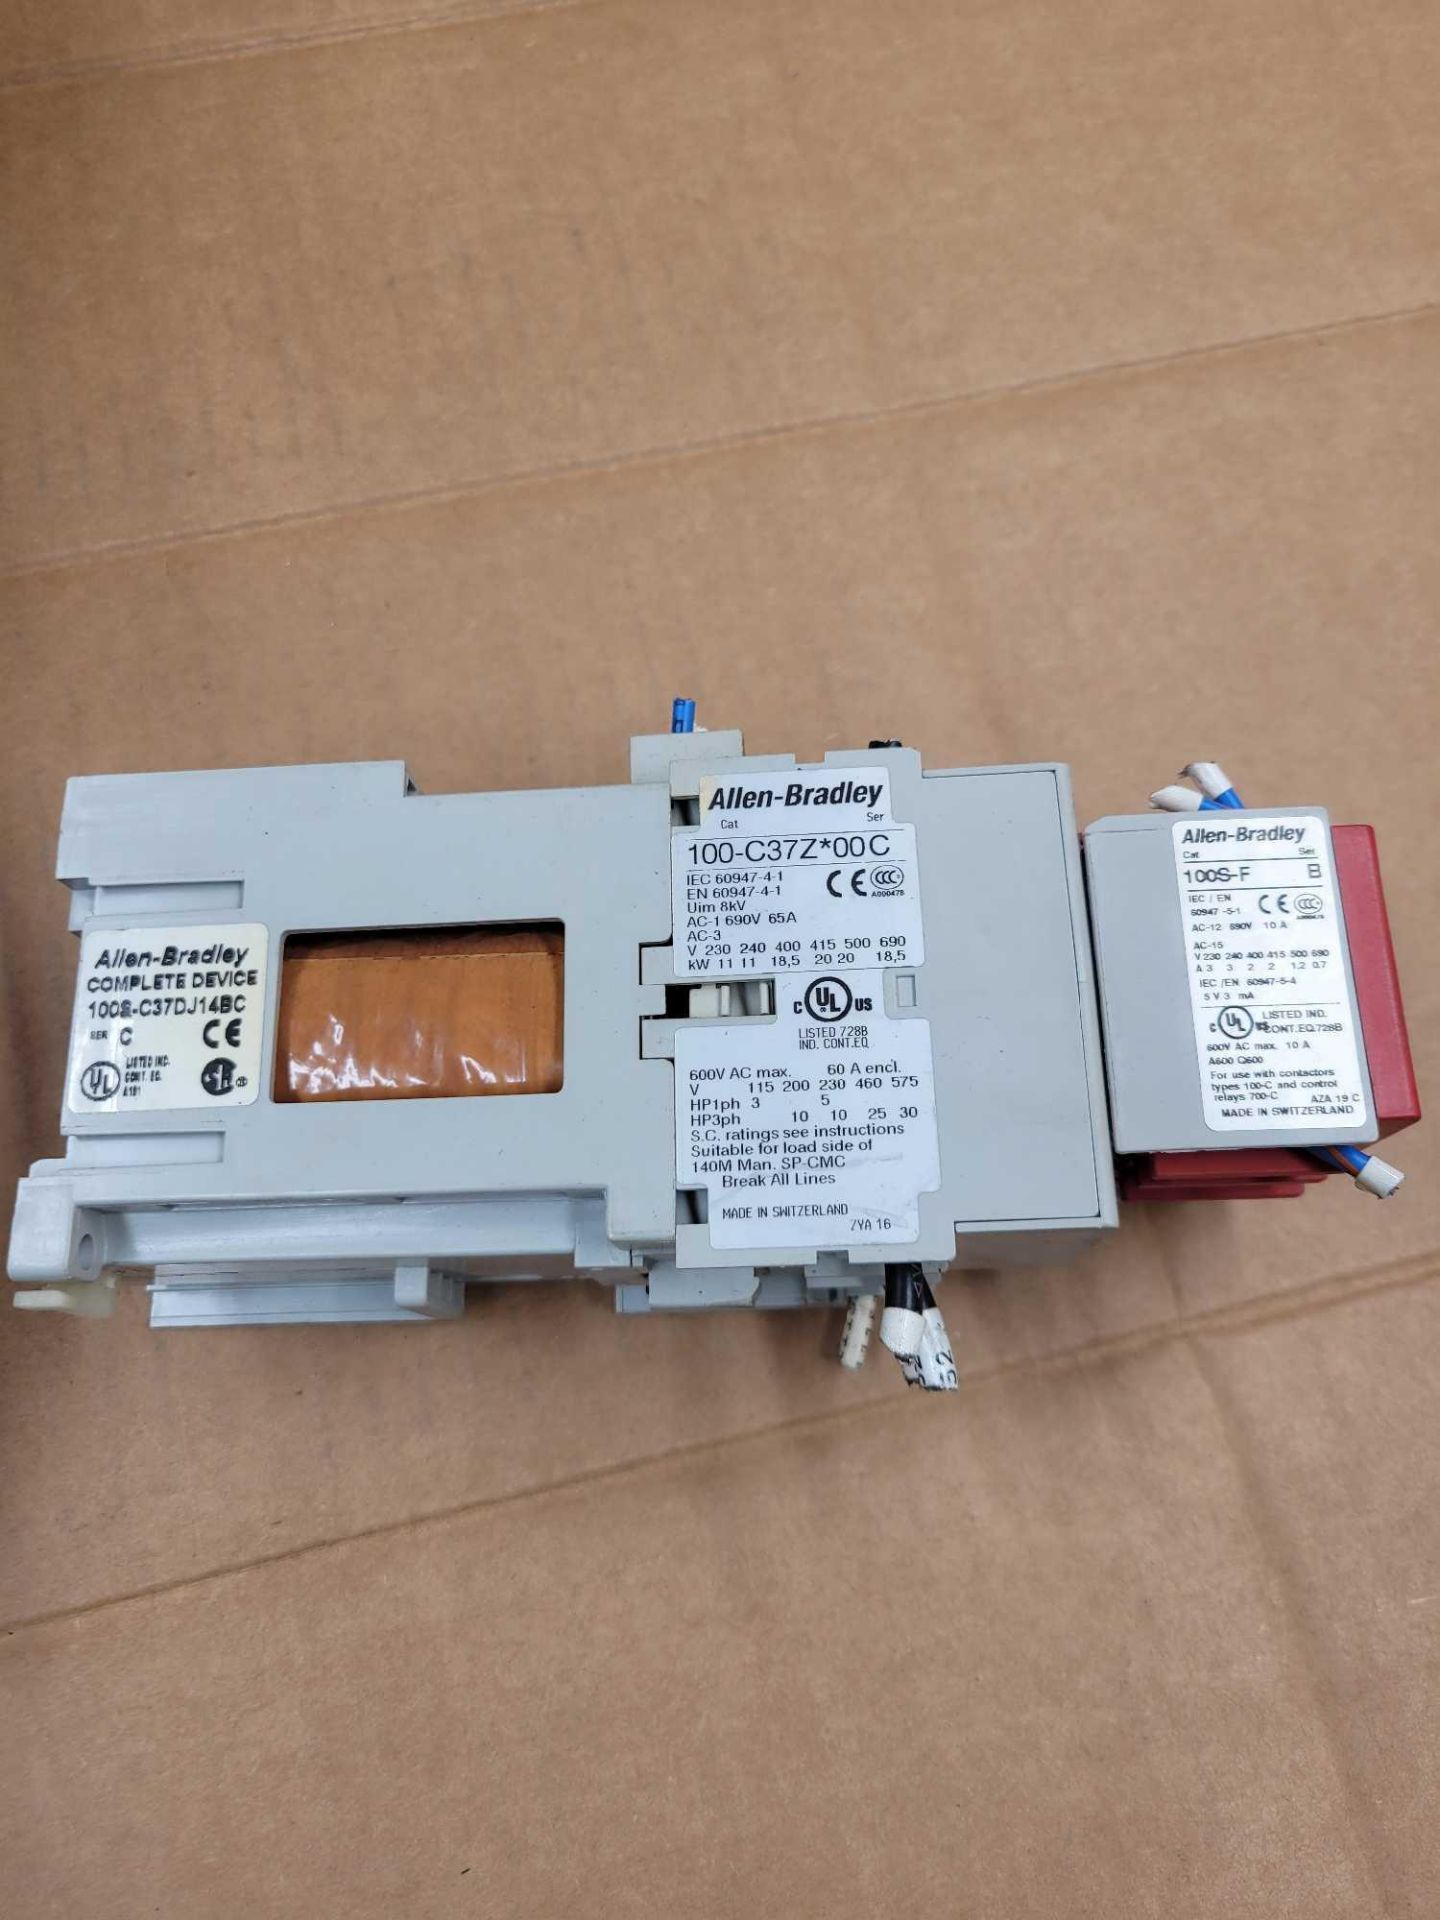 LOT OF 5 ALLEN BRADLEY 100S-C37DJ14BC / Series C Guardmaster Safety Contactor  /  Lot Weight: 10.6 l - Image 3 of 7